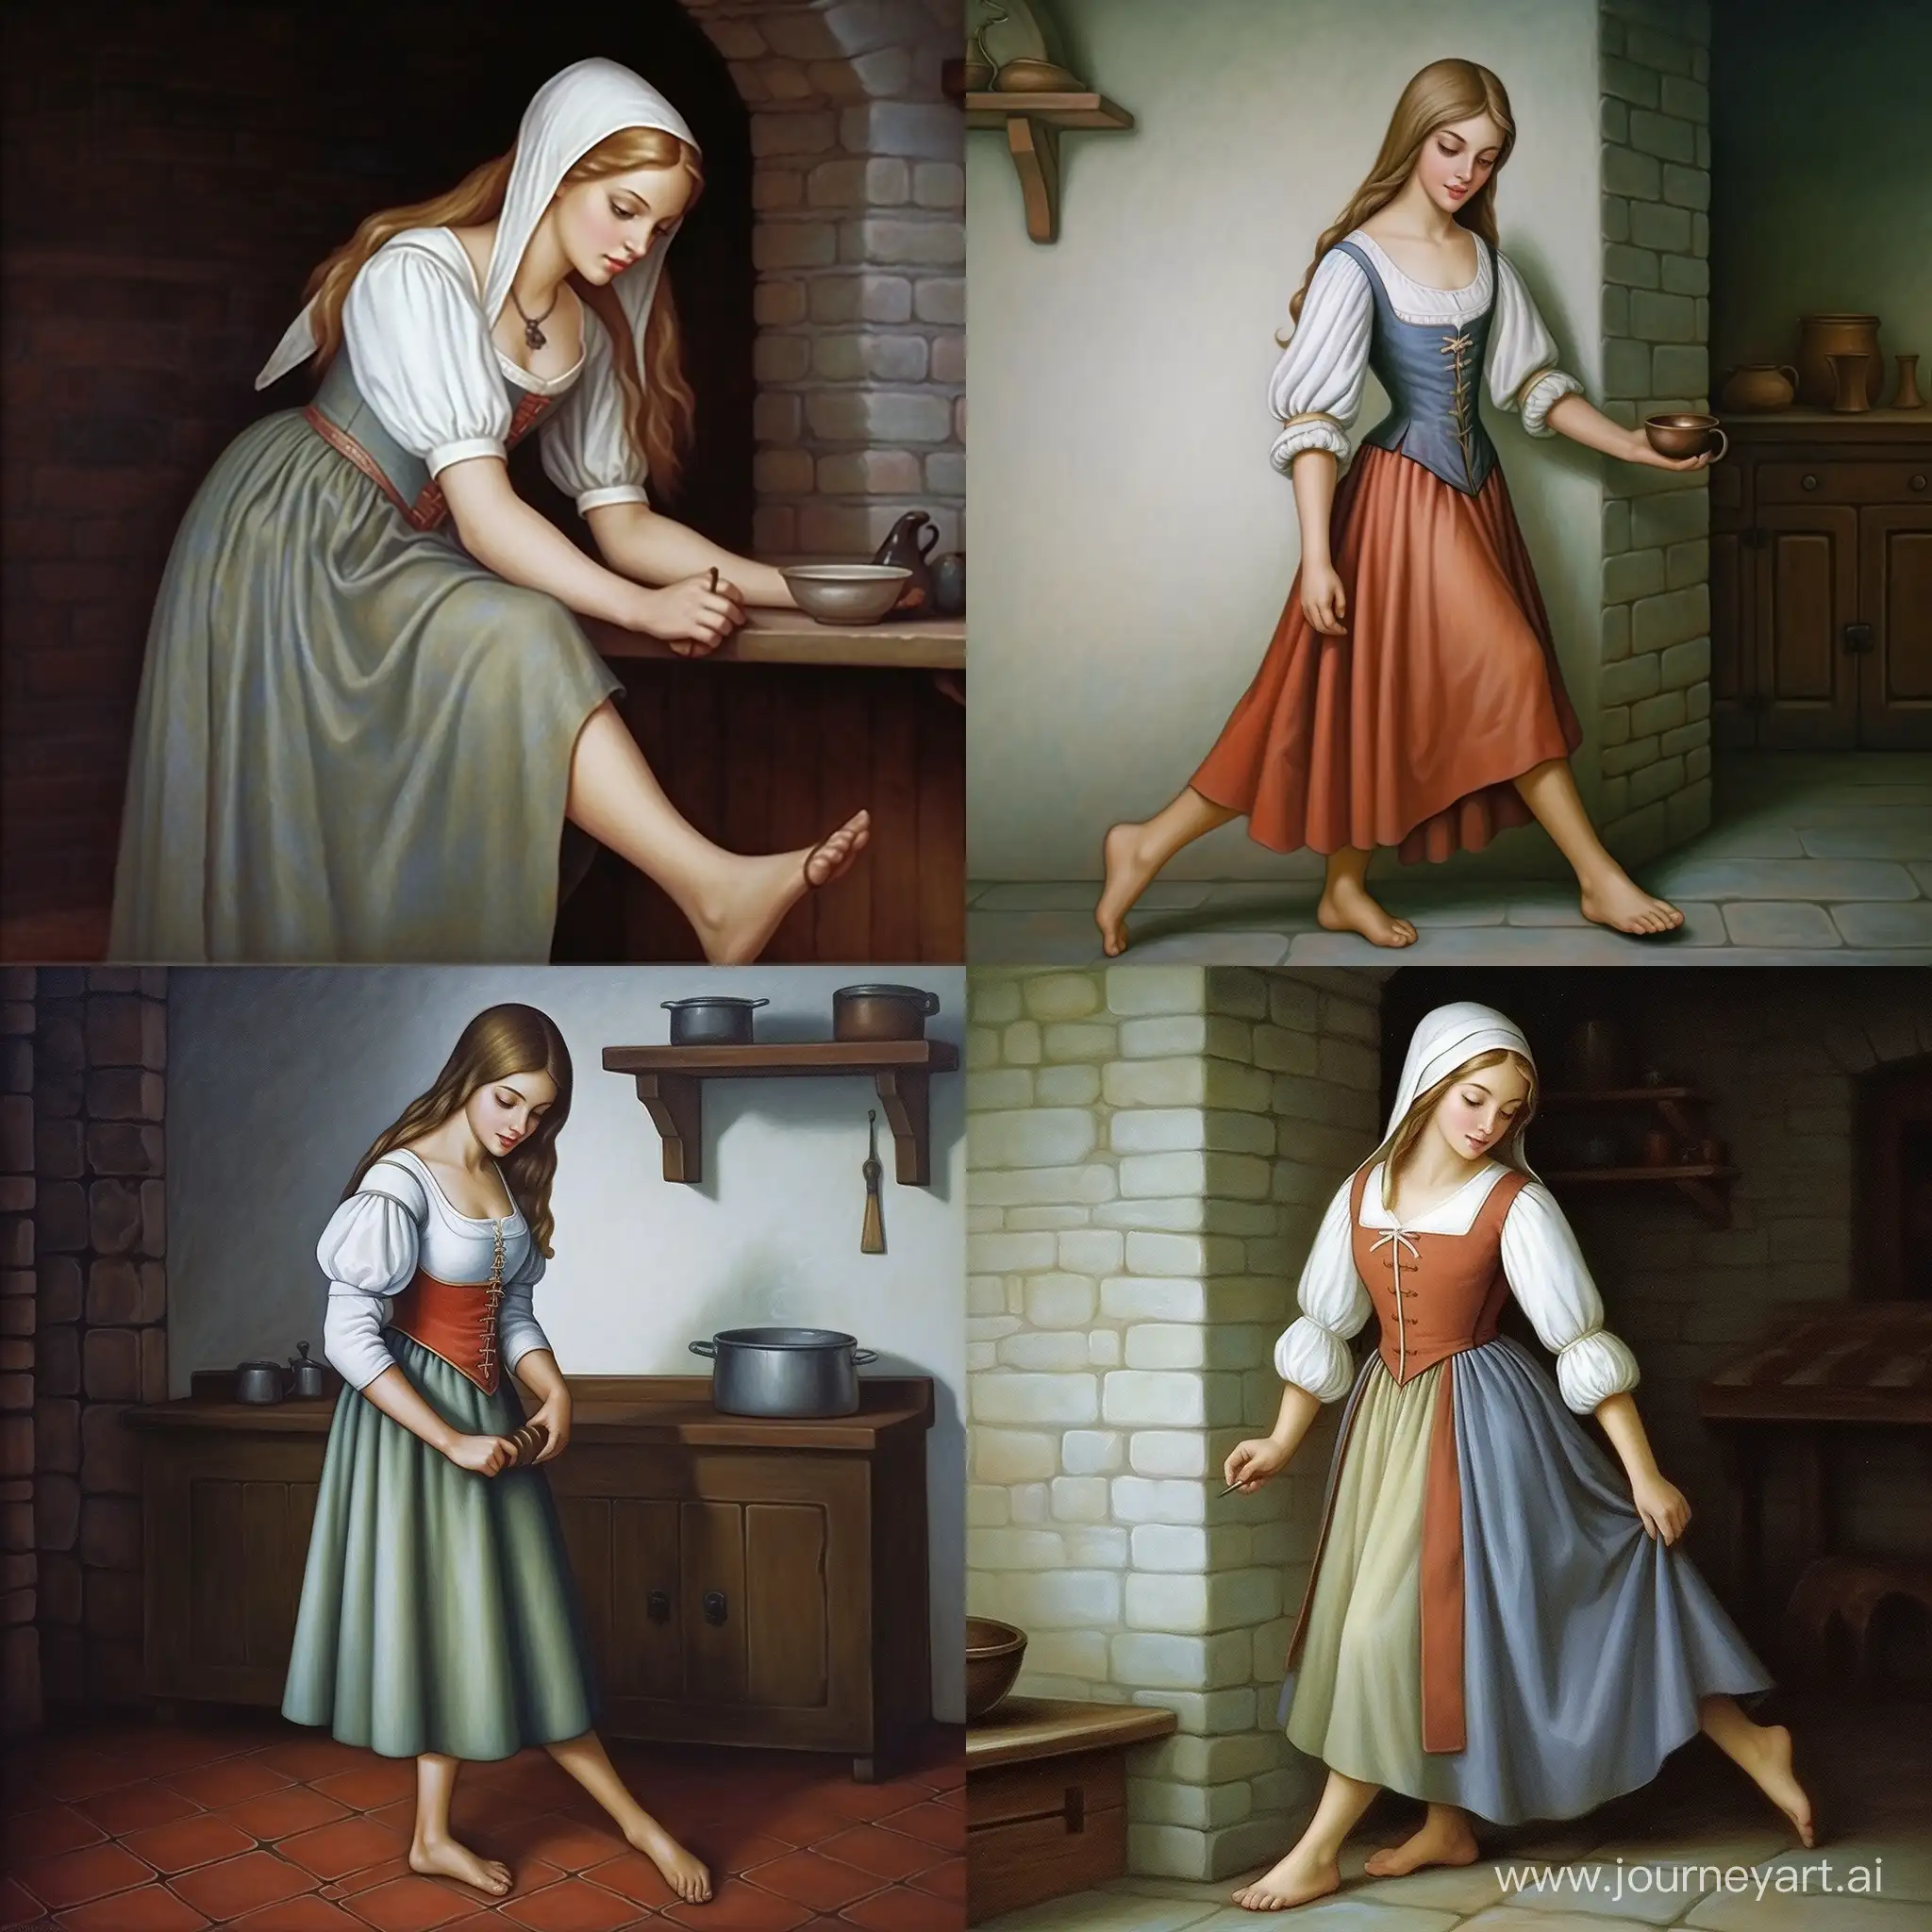 A barefeet maid girl with wide anklets working in kitchen of Middle Ages in oil painting style, the anklets are linked together.